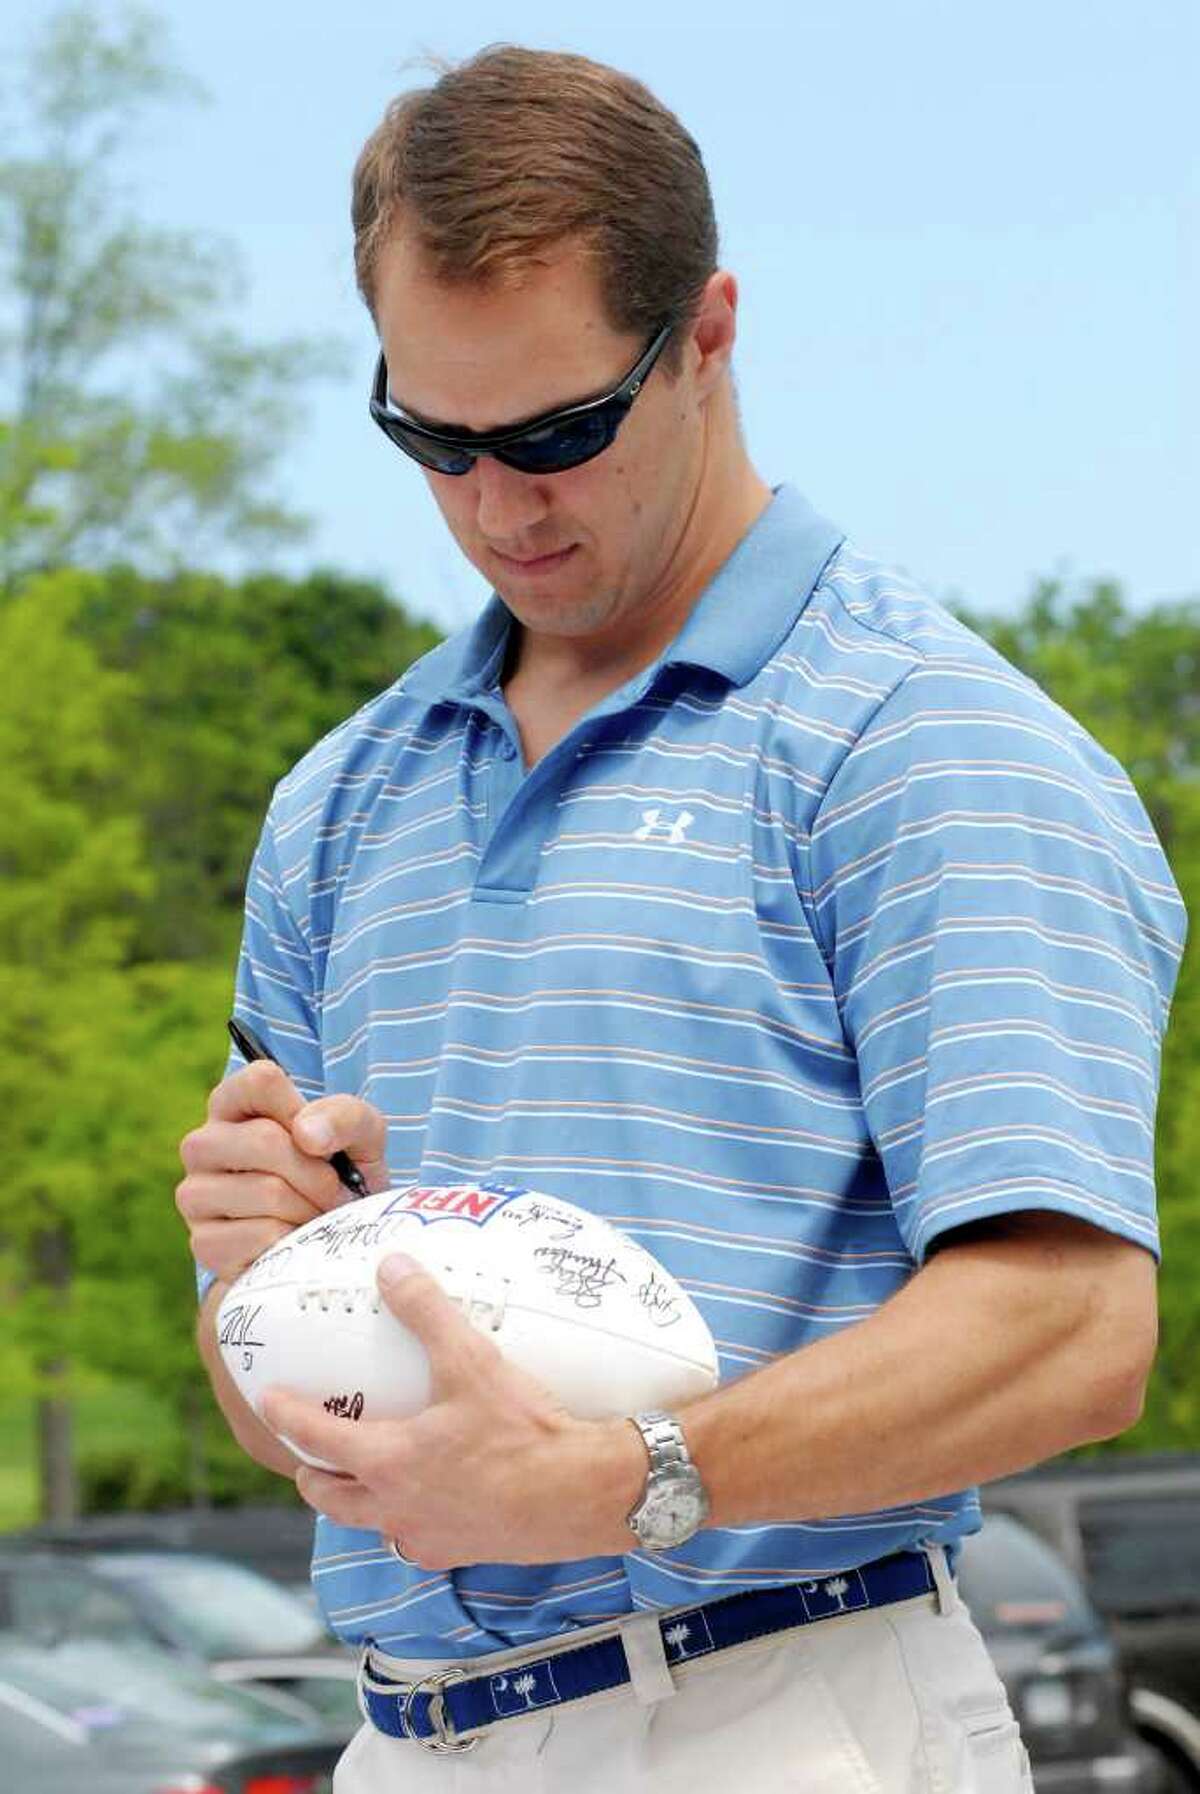 Patrick Kerney signs footballs at the NFL Alumni Connecticut Chapter 5th annual Celebrity Golf Classic at Country Club of Darien in Darien, Conn. on Monday June 20, 2011.